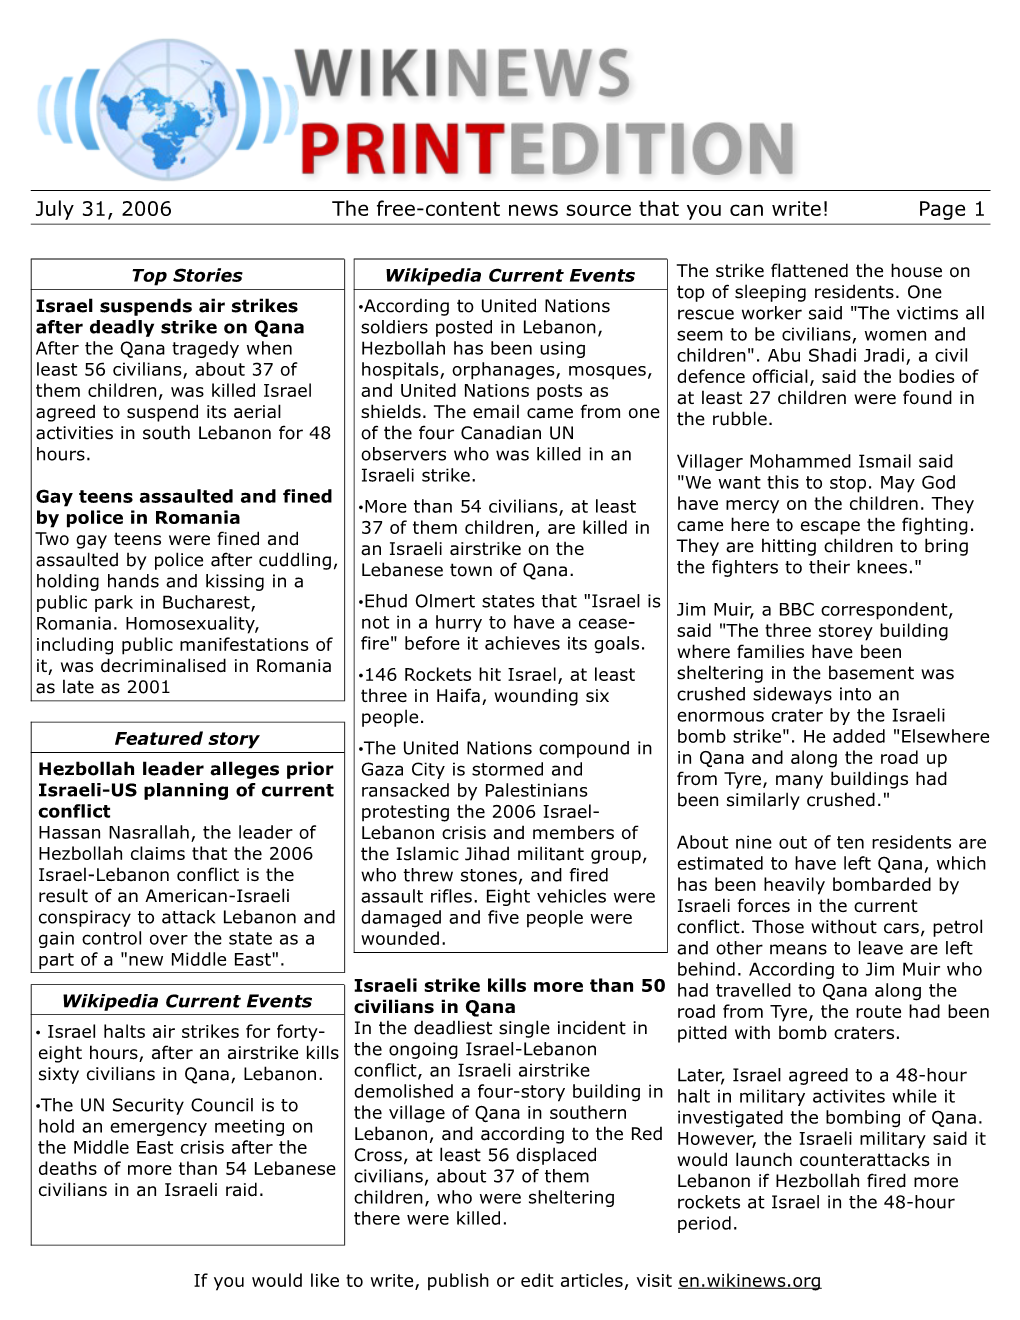 July 31, 2006 the Free-Content News Source That You Can Write! Page 1